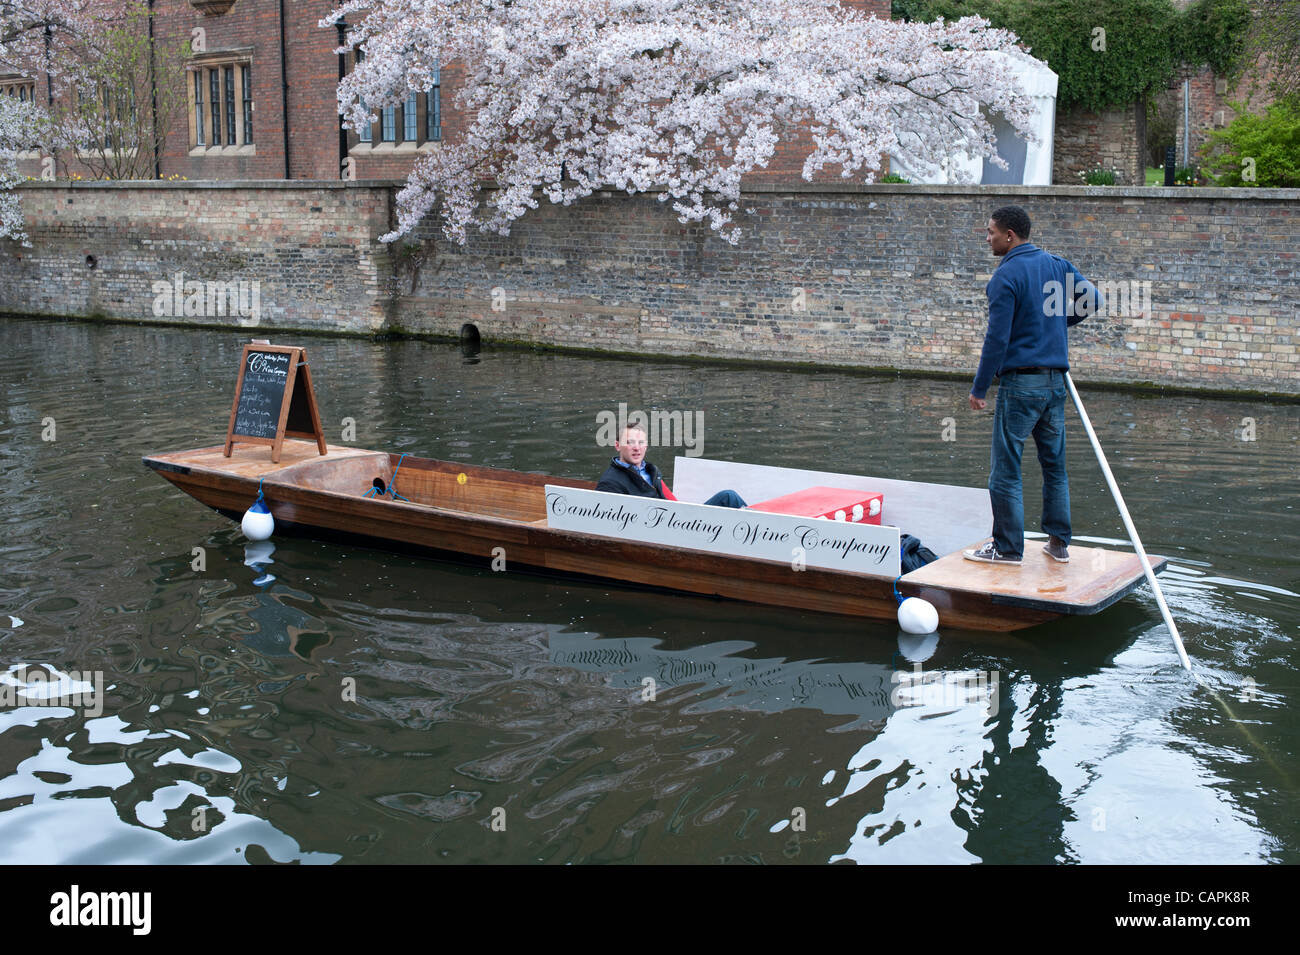 The Cambridge Floating Wine Company punt cruising on the River Cam, Cambridge UK 7/4/12. The punt started trading this weekend selling alcoholic drinks to people on the River. This is the first of its kind at the famous tourist attraction which gets thousands of visitors a year. Stock Photo